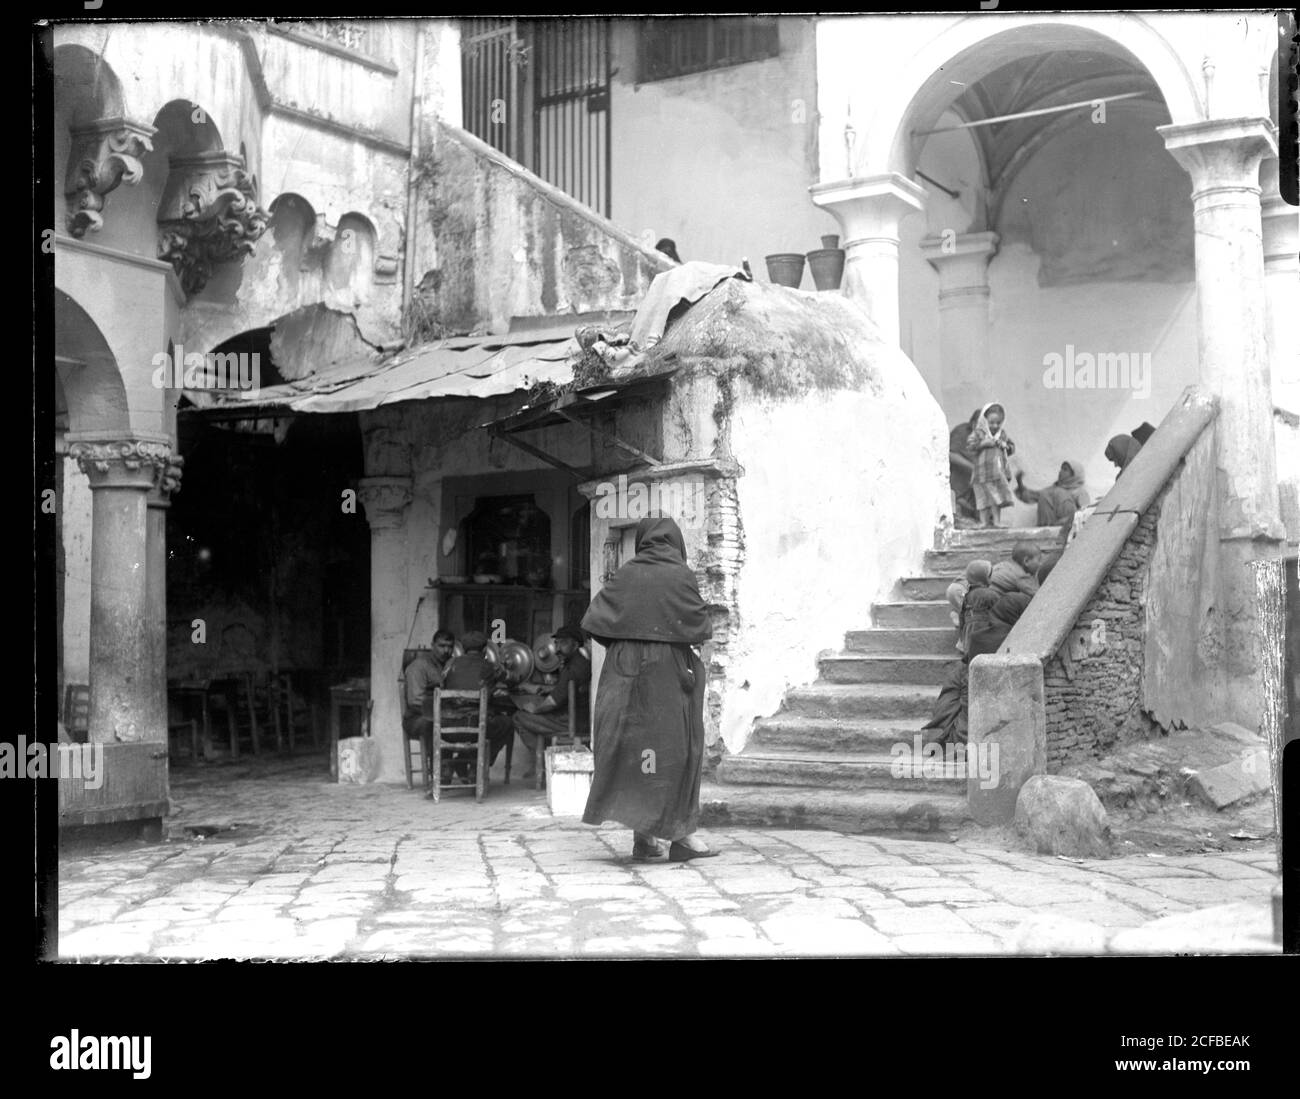 Şadırvan Camii Konak in Smyrna / Izmir, Turkey. Three men sitting on chairs talking or playing, crowd of playing children. Photograph on dry glass plate from the Herry W. Schaefer collection, around 1910. Stock Photo